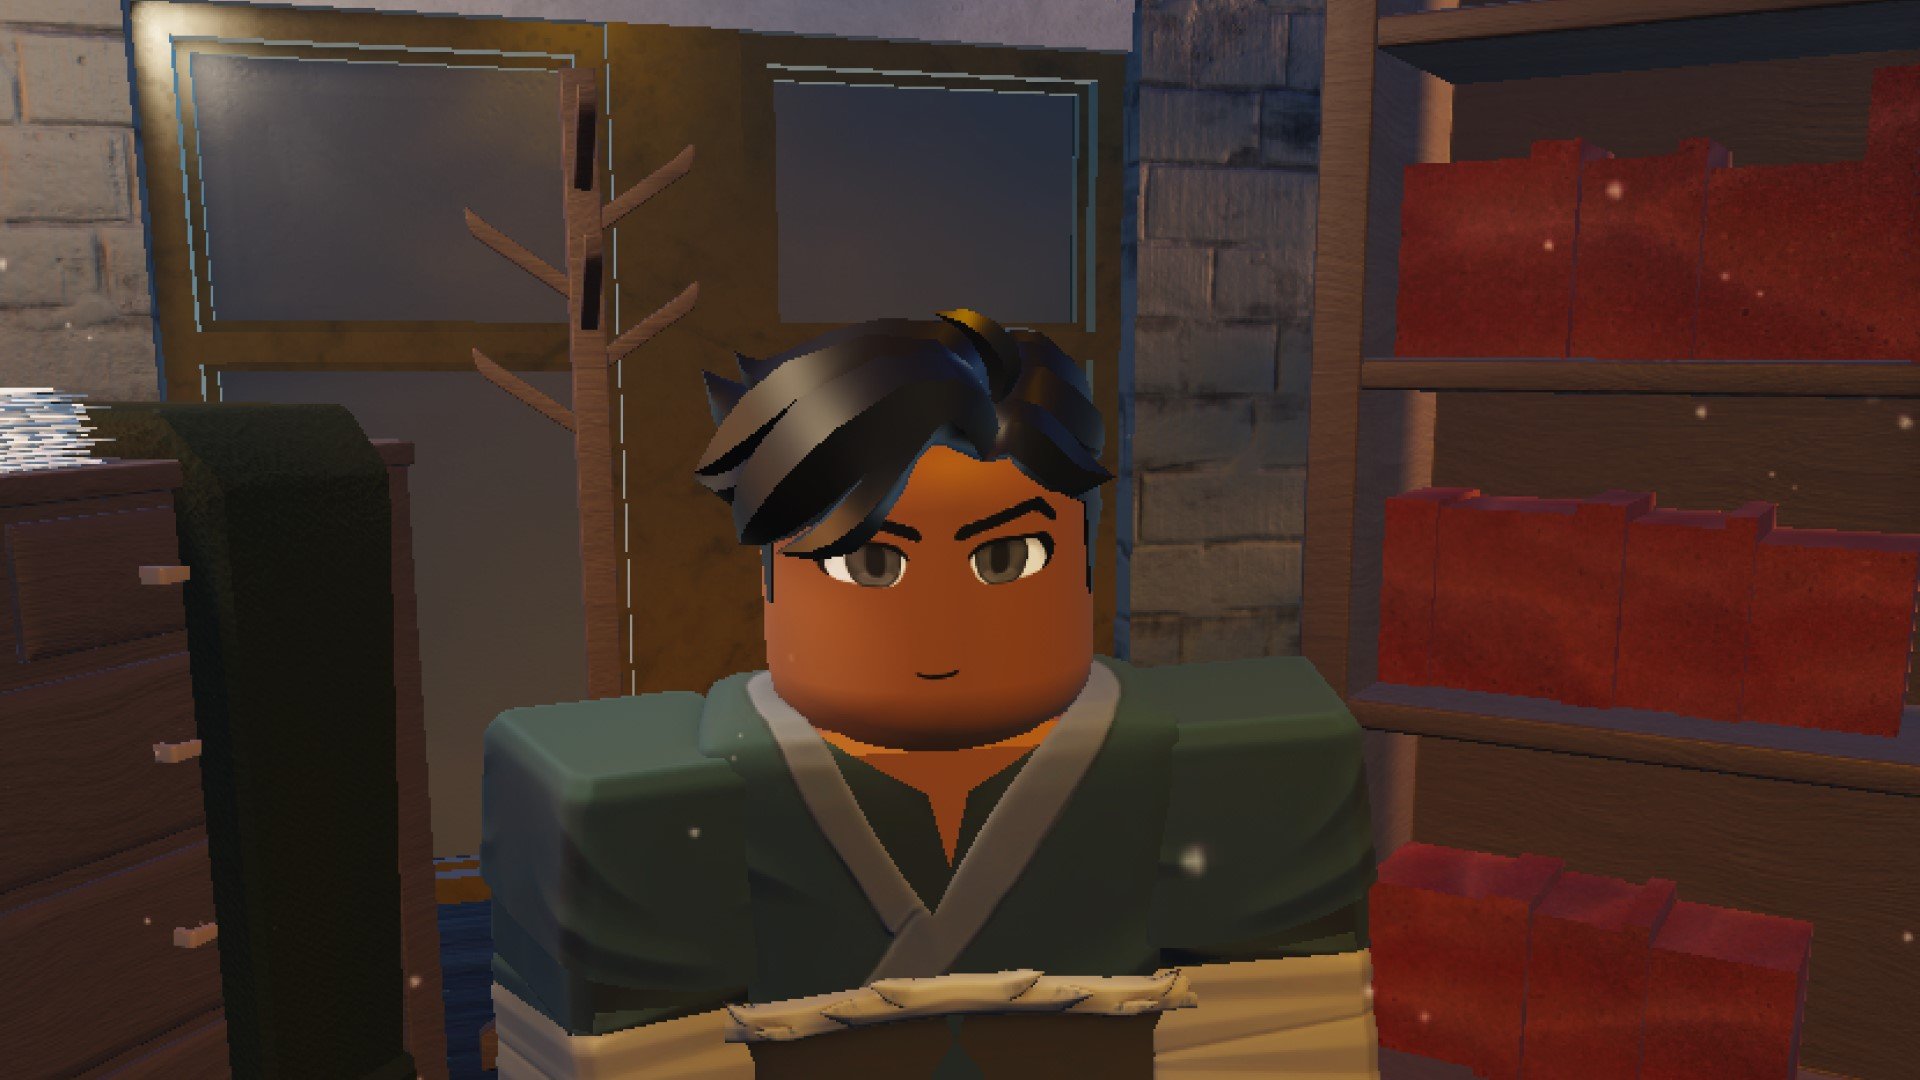 A character from Roblox game RoBending standing in some kind of training room.